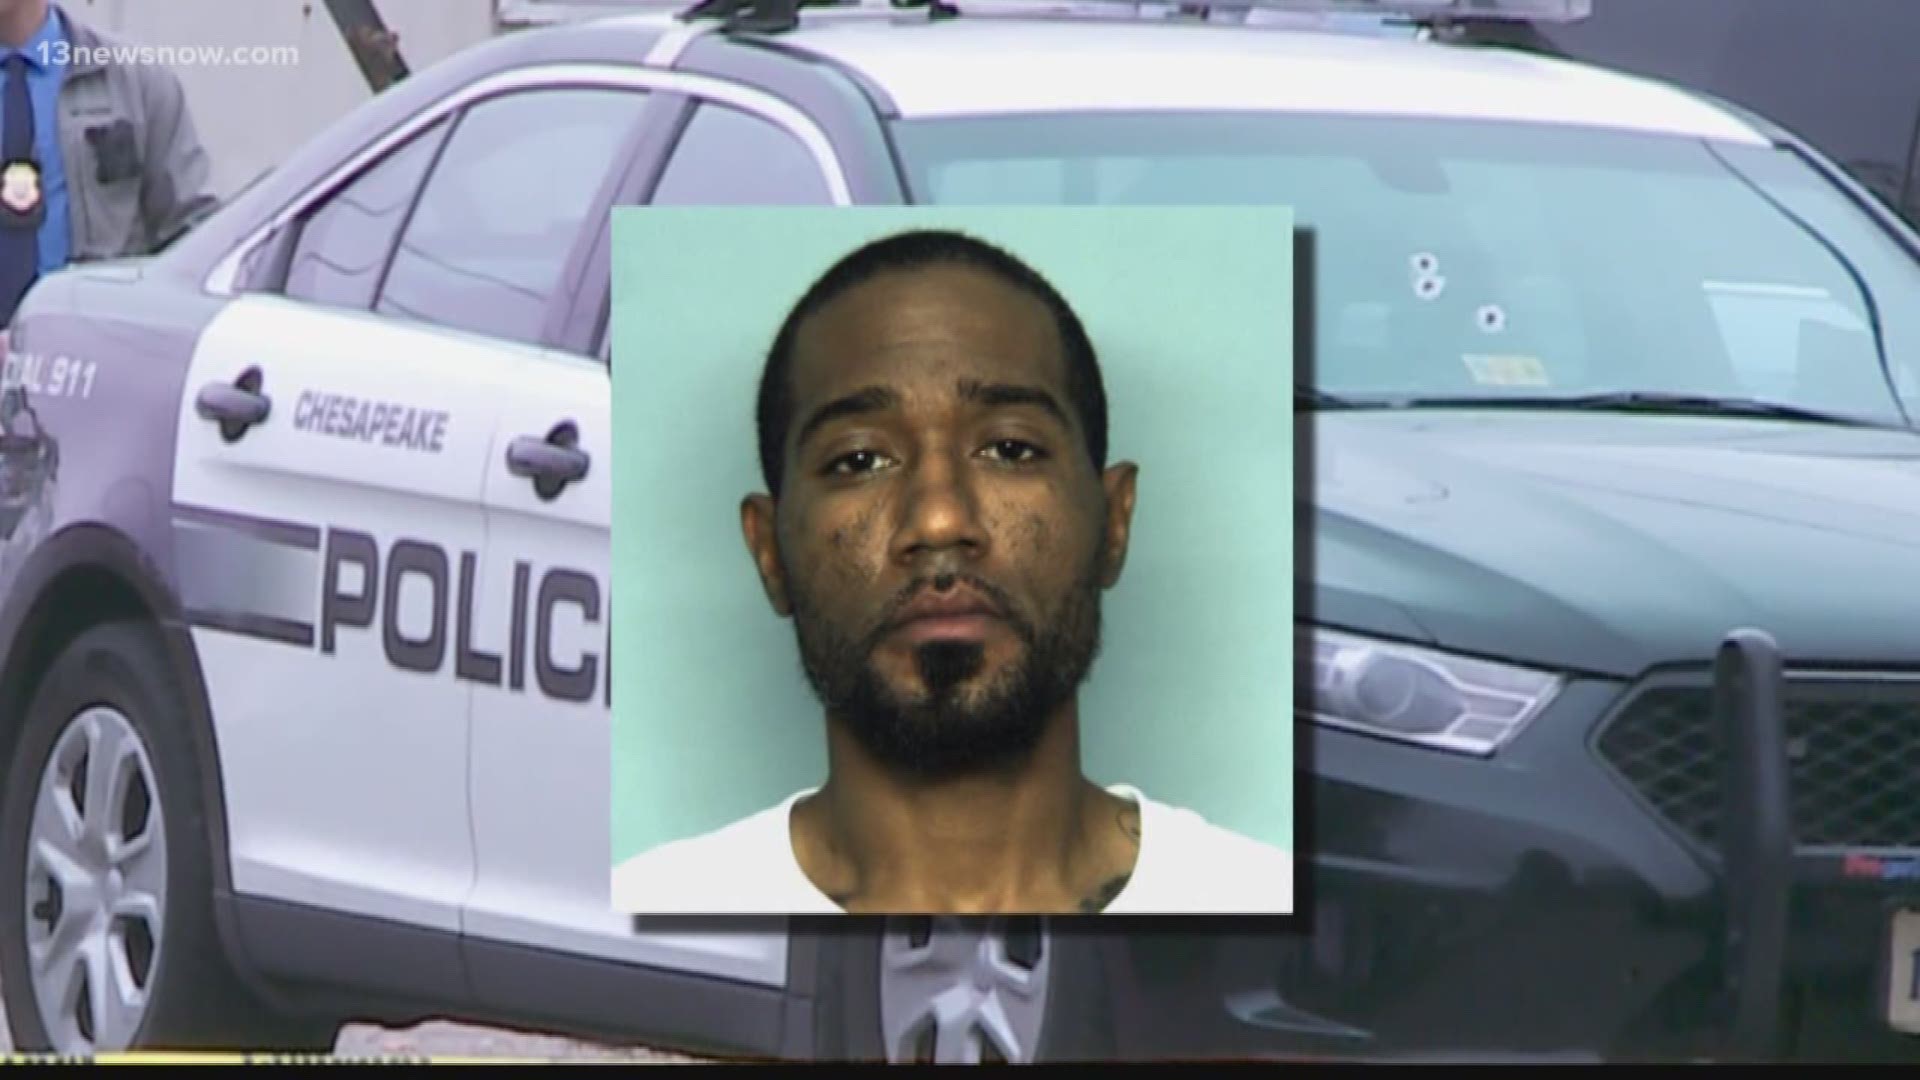 A man is accused of shooting at Chesapeake Police and leading local and state officers on a long manhunt.